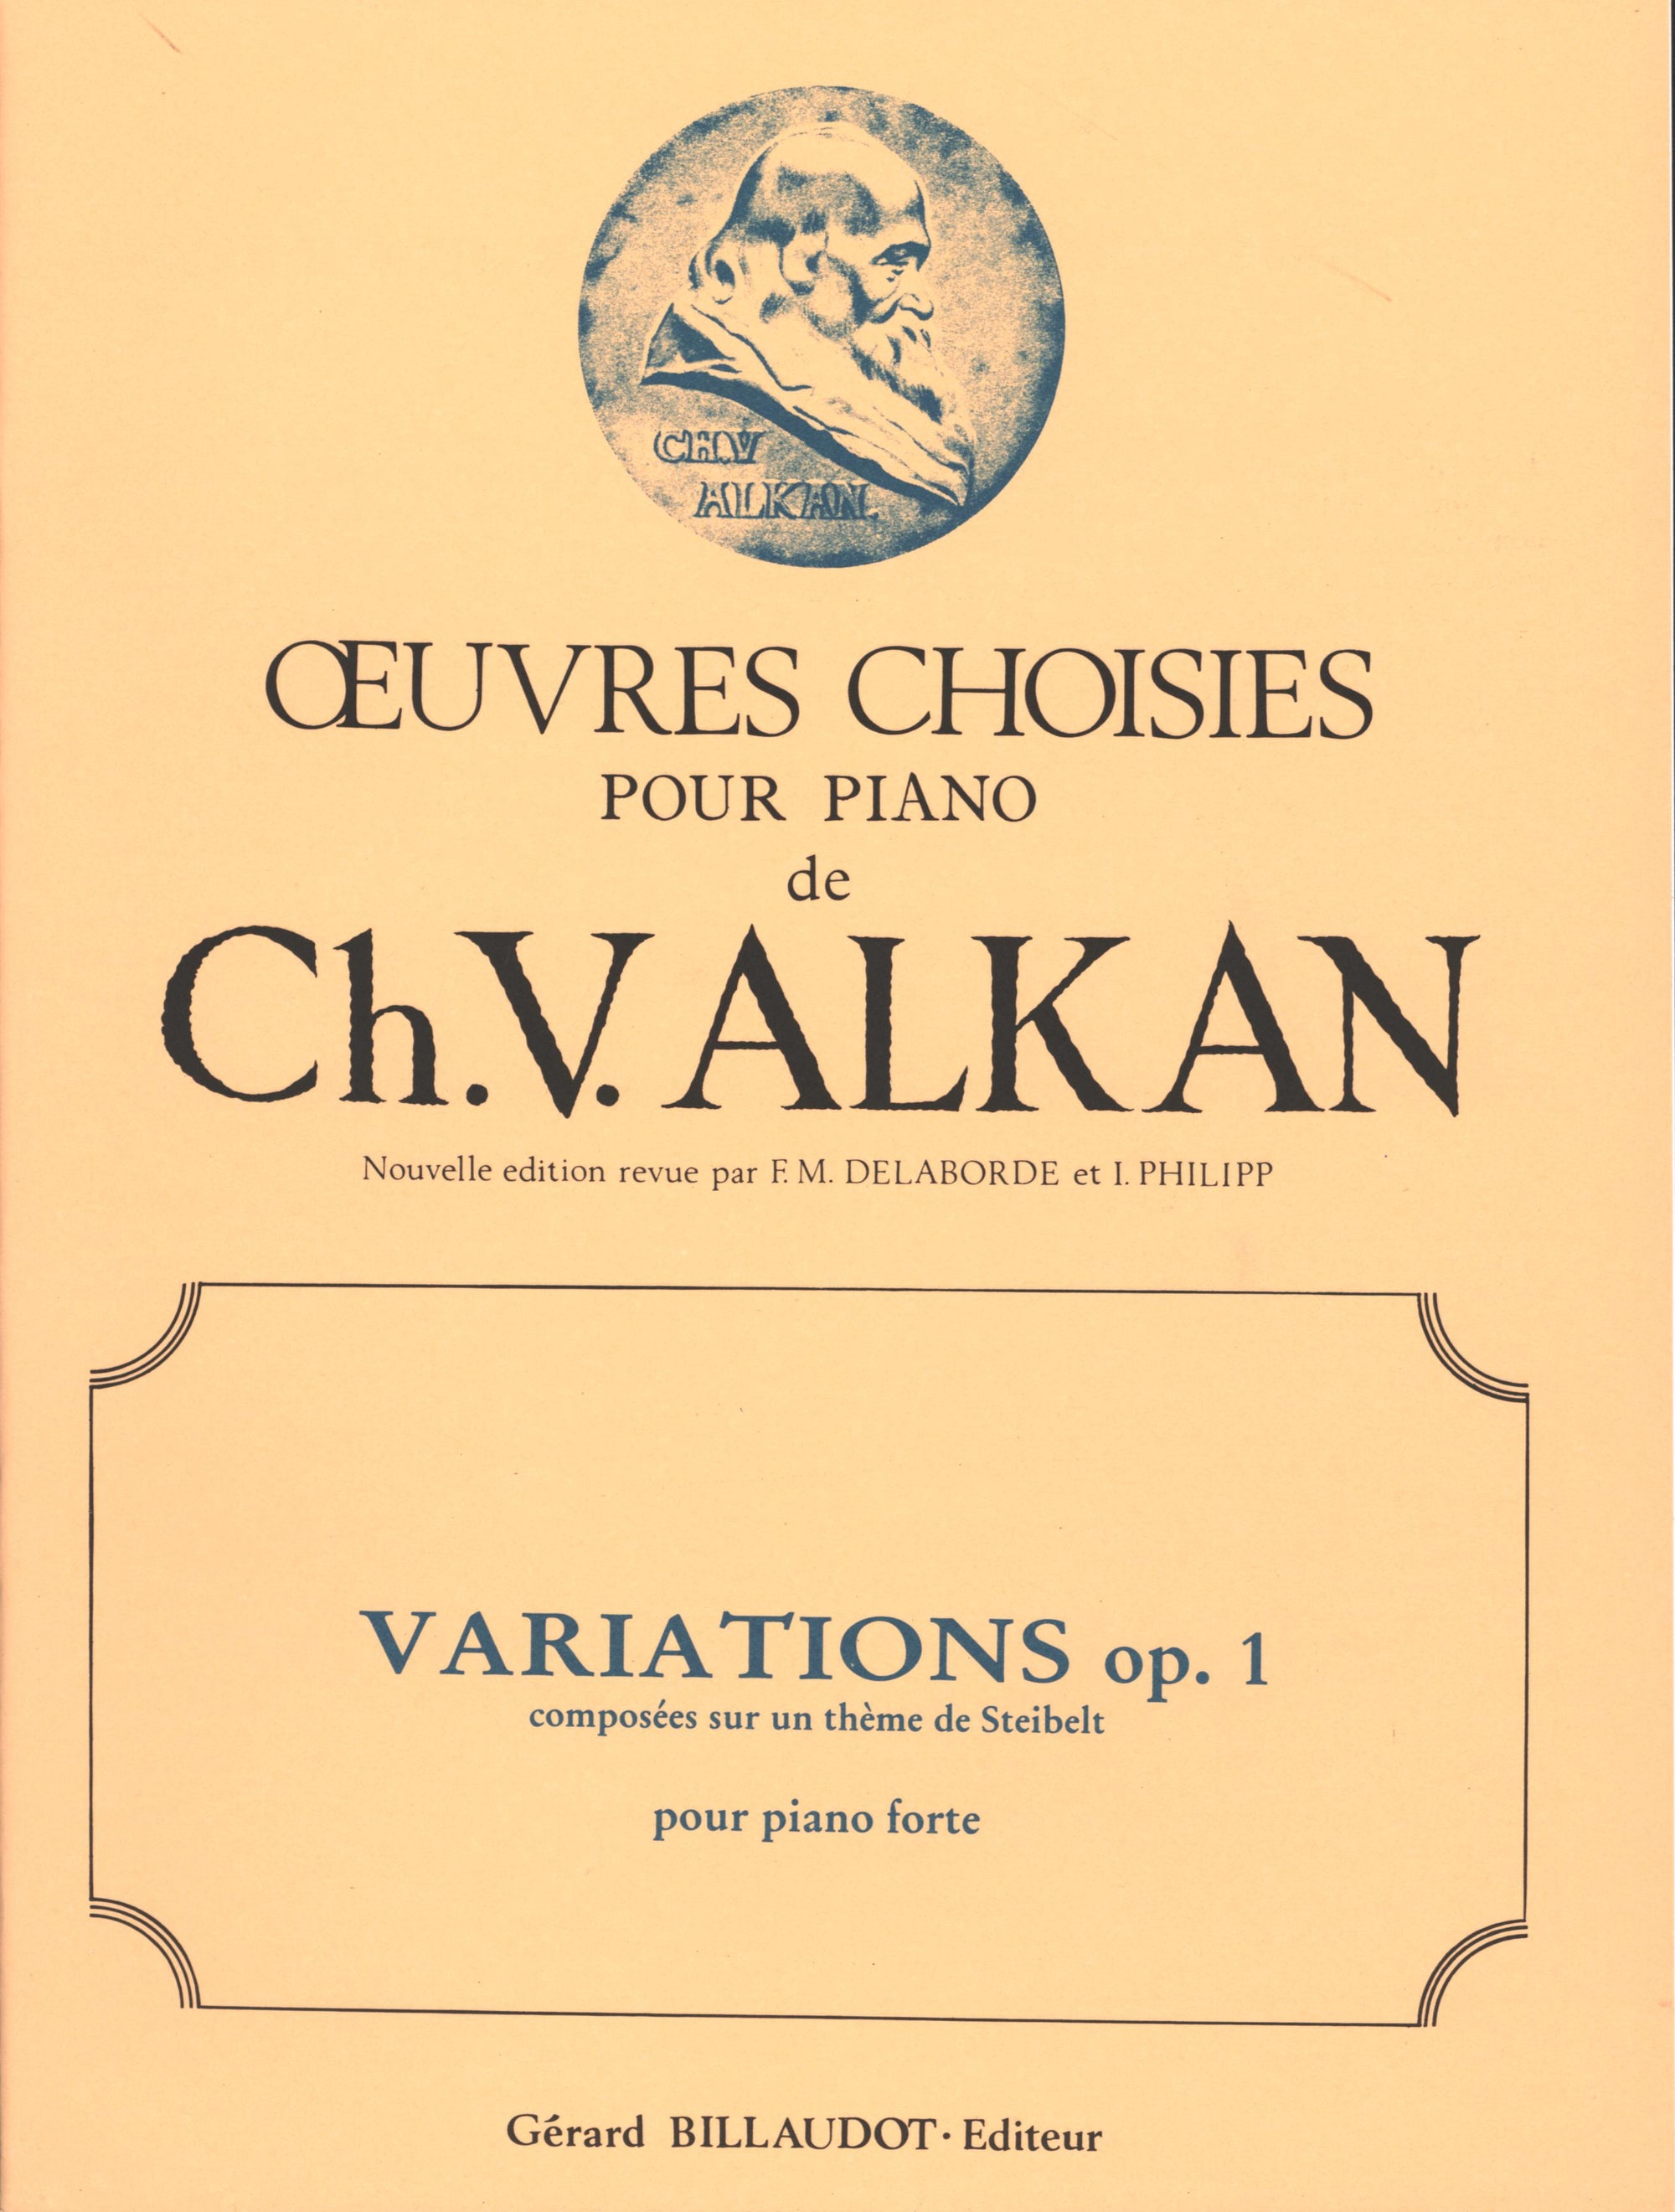 Alkan: Variations on a Theme from Steibelt, Op. 1